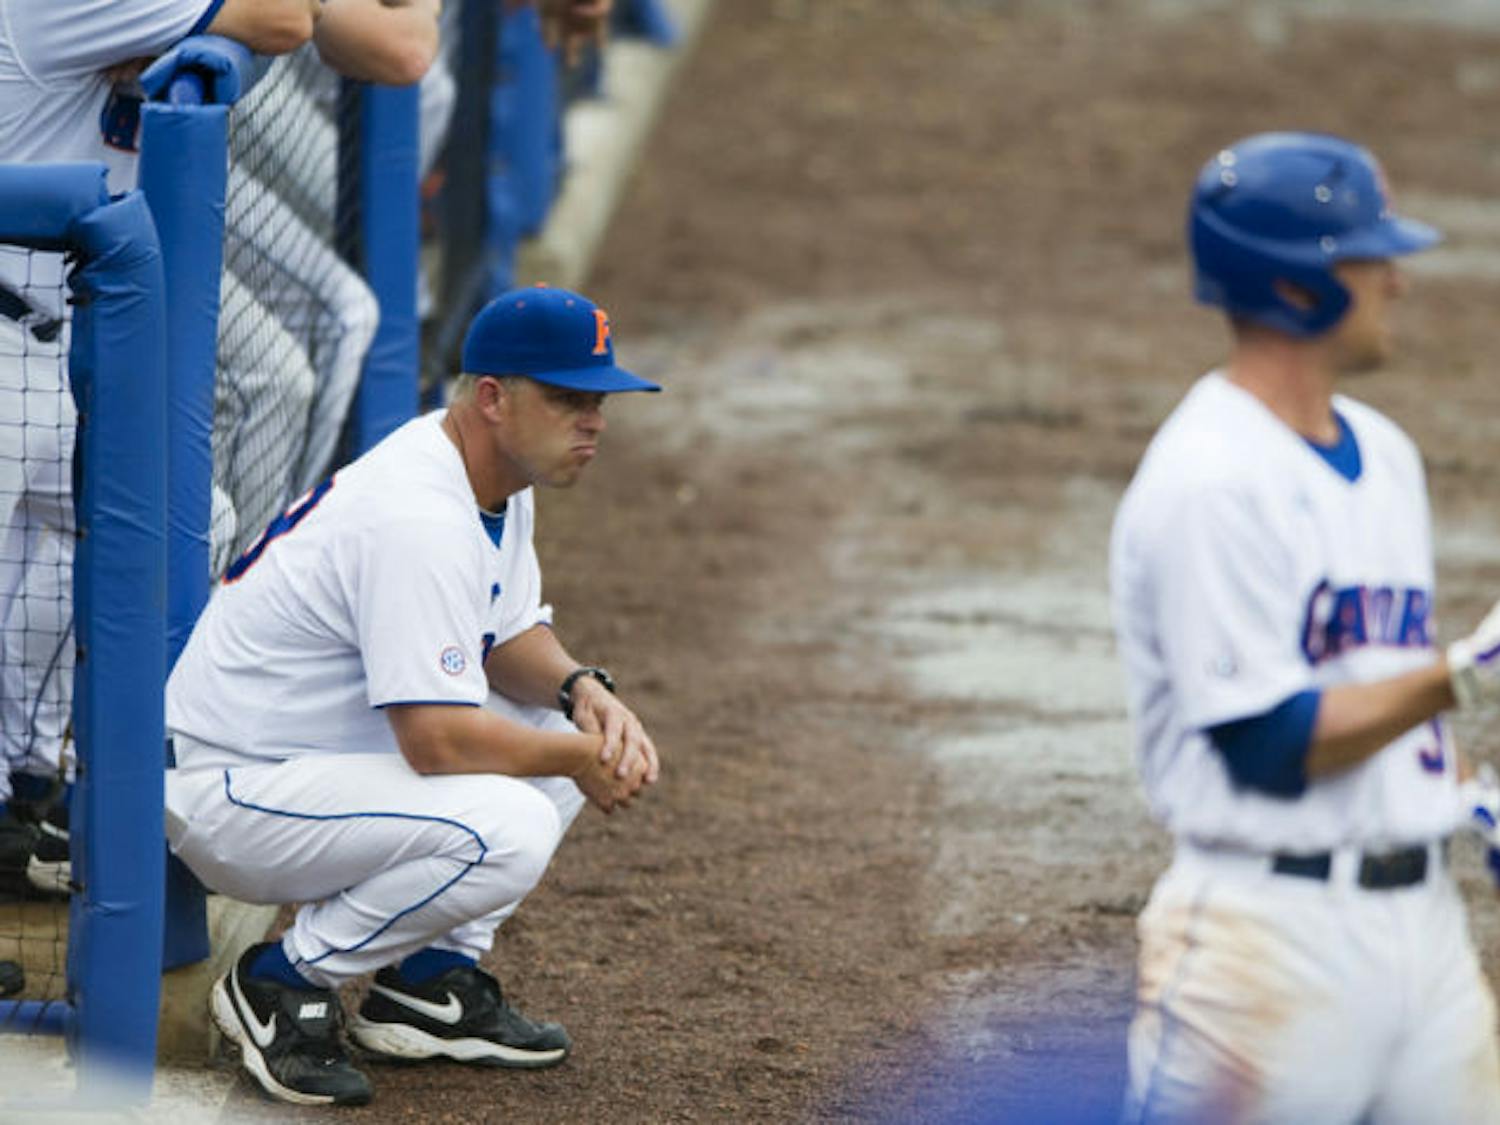 UF coach Kevin O'Sullivan watches from outside the dugout during the Gators' 9-7 loss to Southern Miss. in game one of NCAA Super Regional play in McKethan stadium Saturday, June 6, 2009. O'Sullivan and the Gators were eliminated from the 2014 NCAA Tournament in the regional round on Saturday.